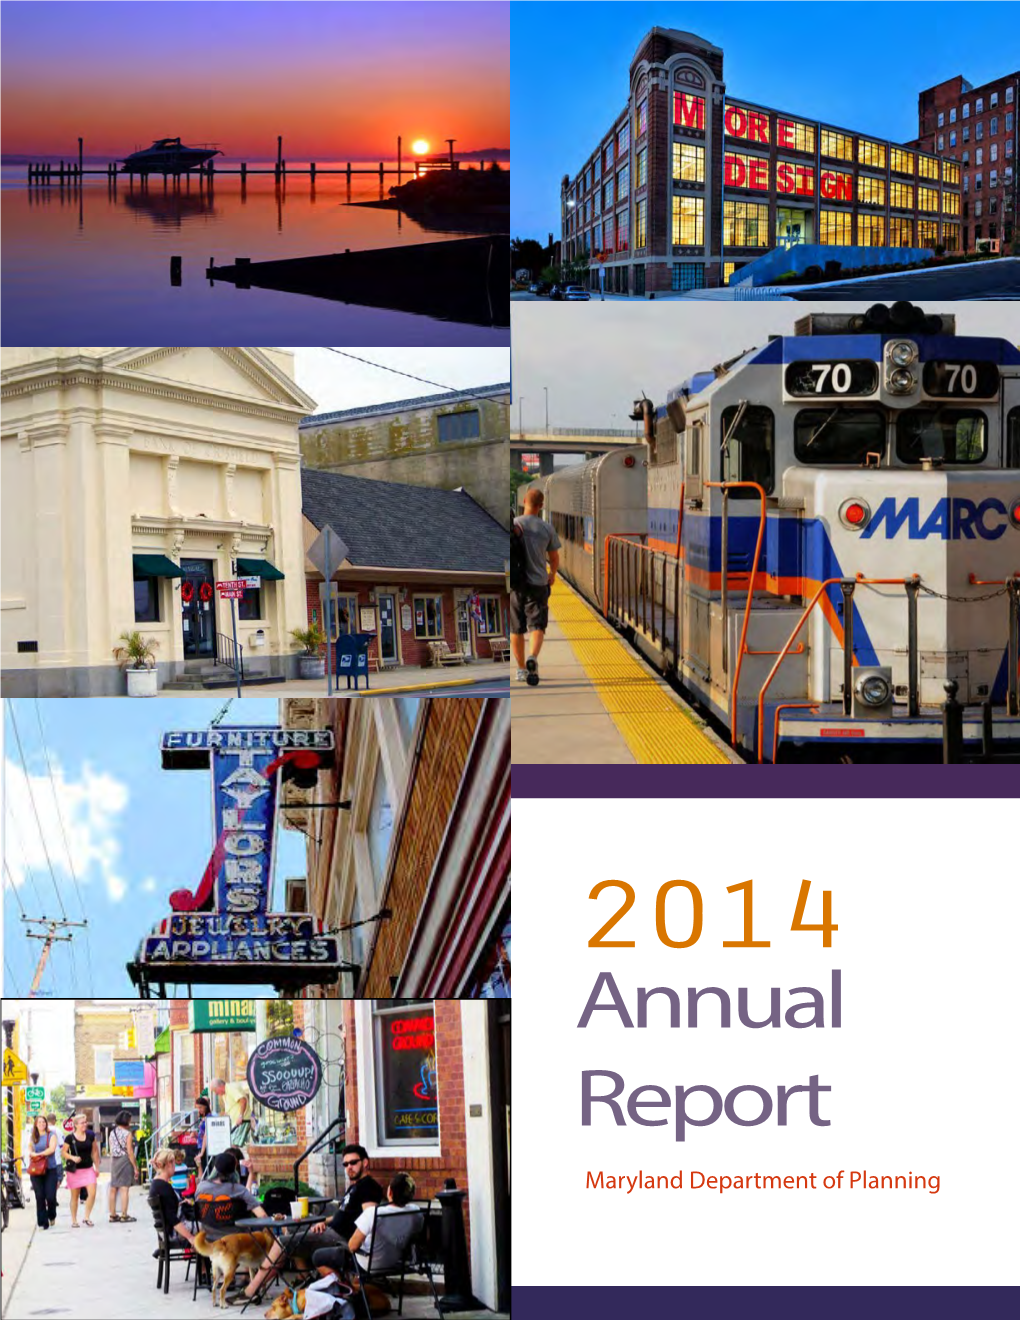 Maryland Department of Planning Annual Report 2014